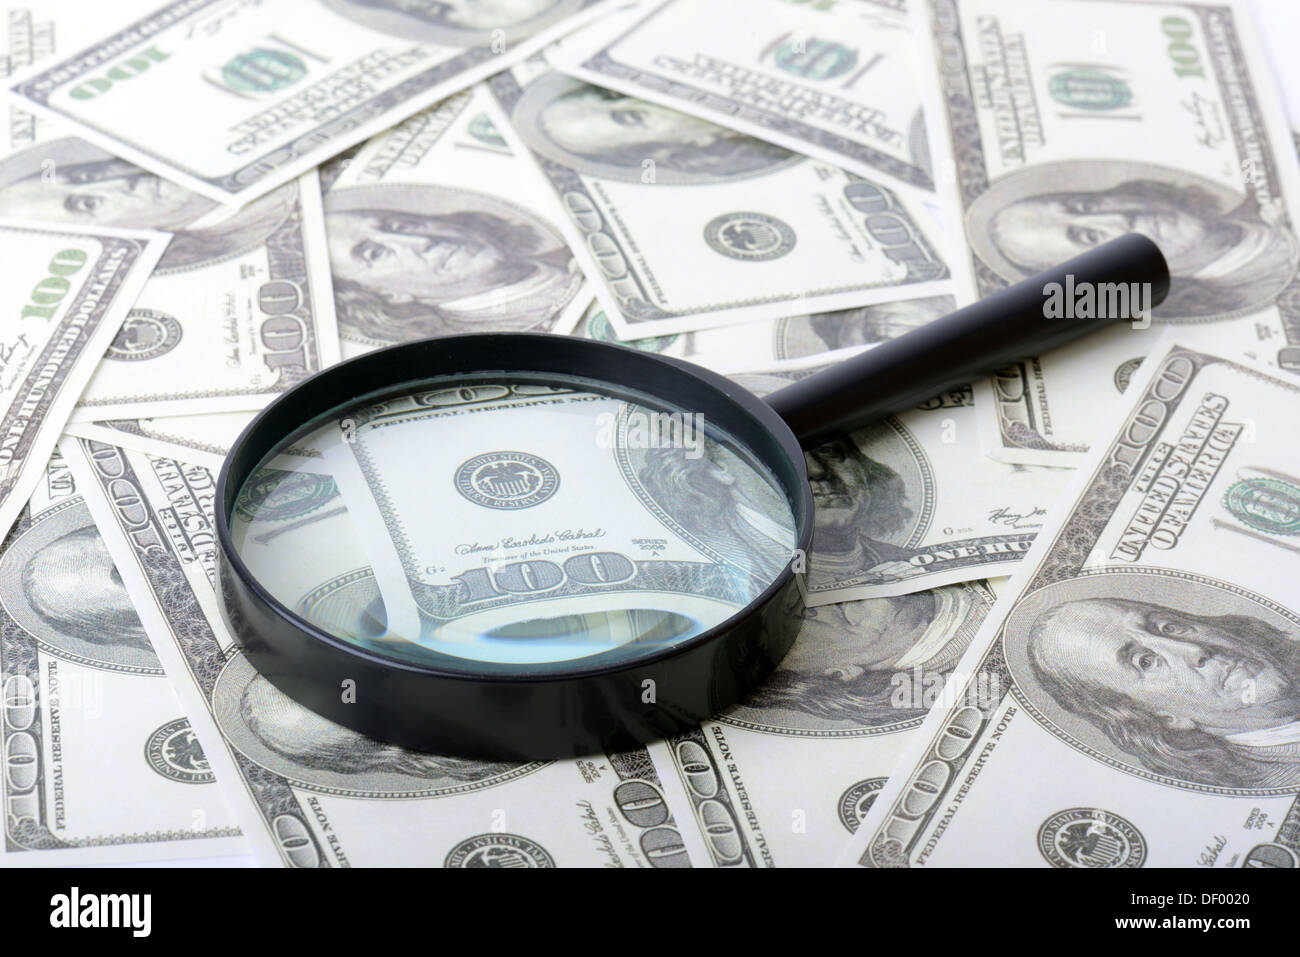 Concept of searching for money Stock Photo